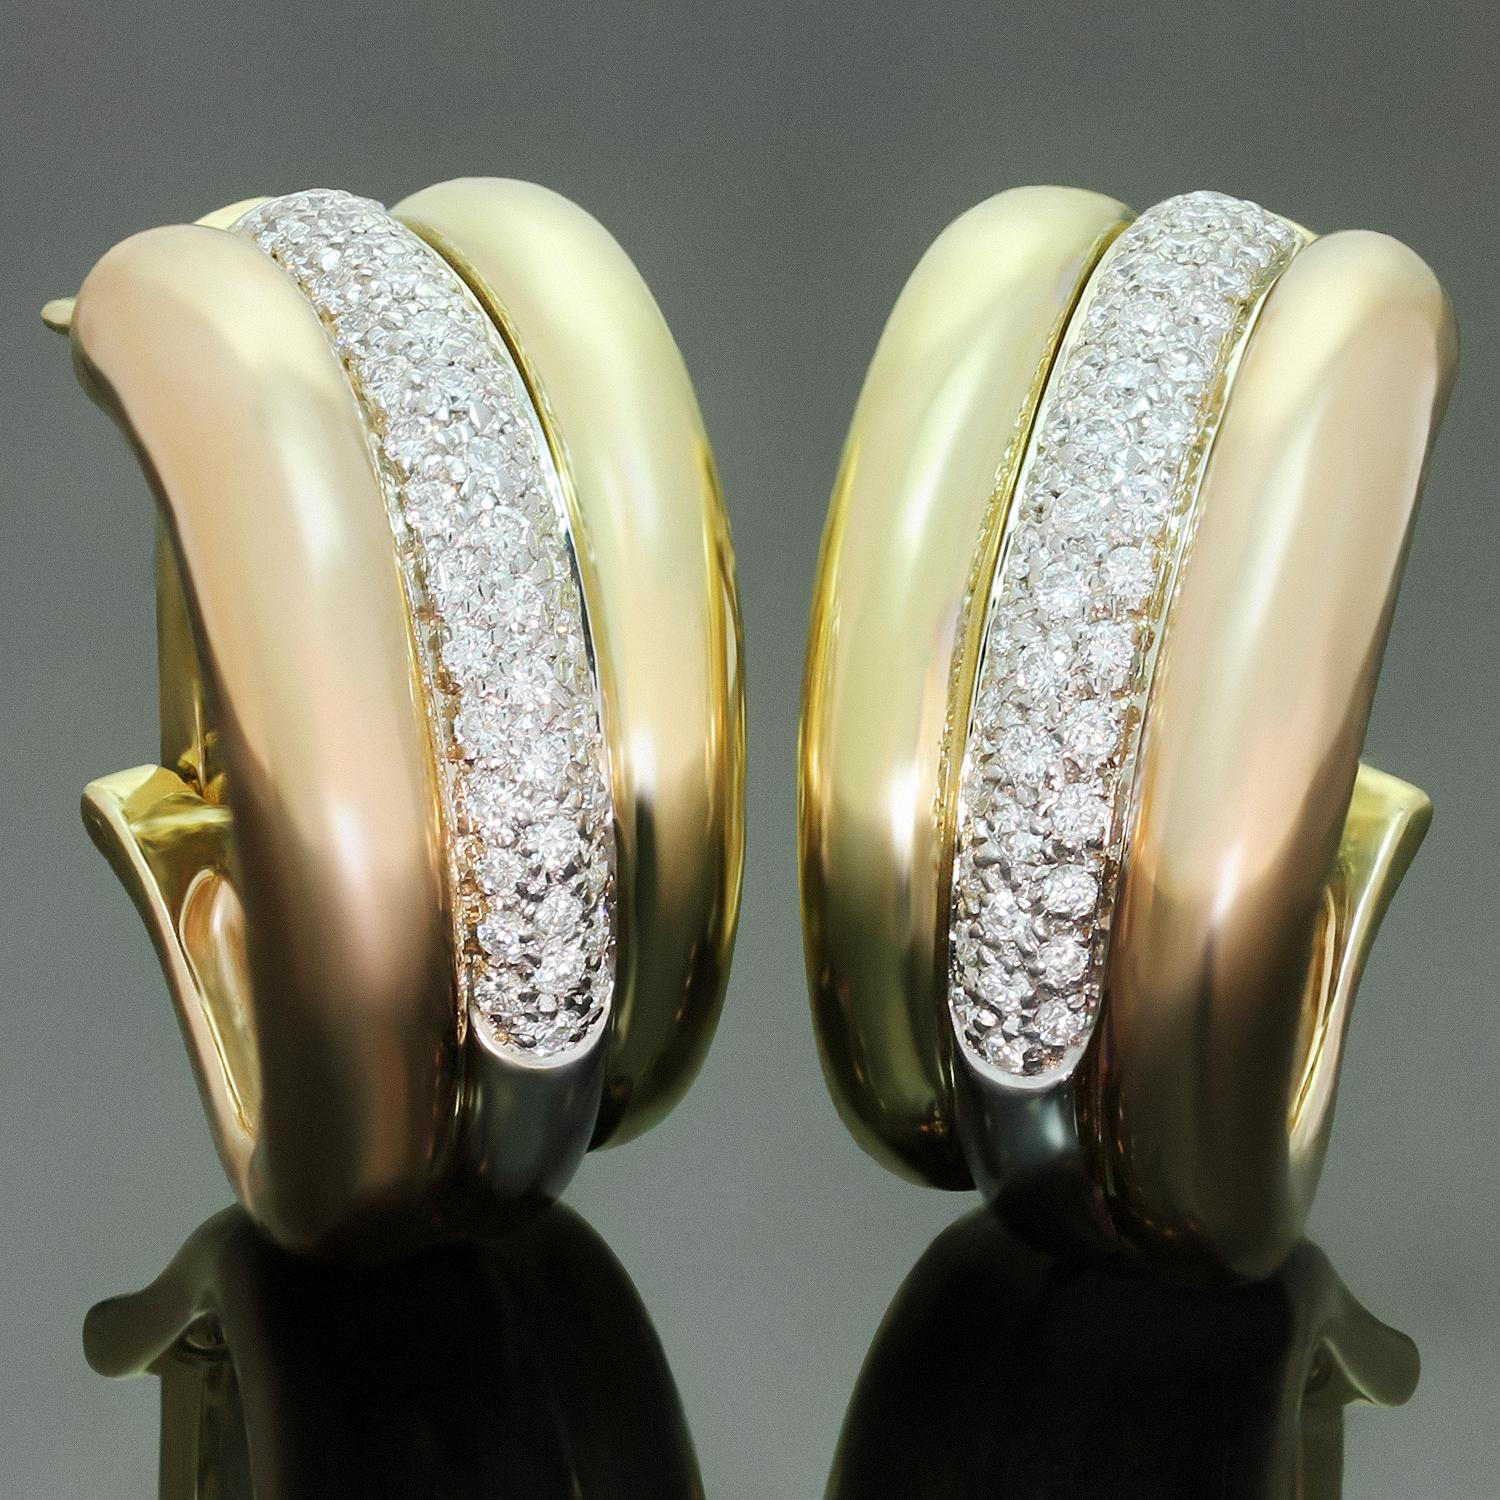 These gorgeous oval wrap earrings from Cartier's Trinity collection are crafted in 18k yellow, white and rose gold and pave-set with F-G VVS1-VVS2 brilliant-cut round diamonds of an estimated 1.35 carats in white gold. An iconic design for everyday